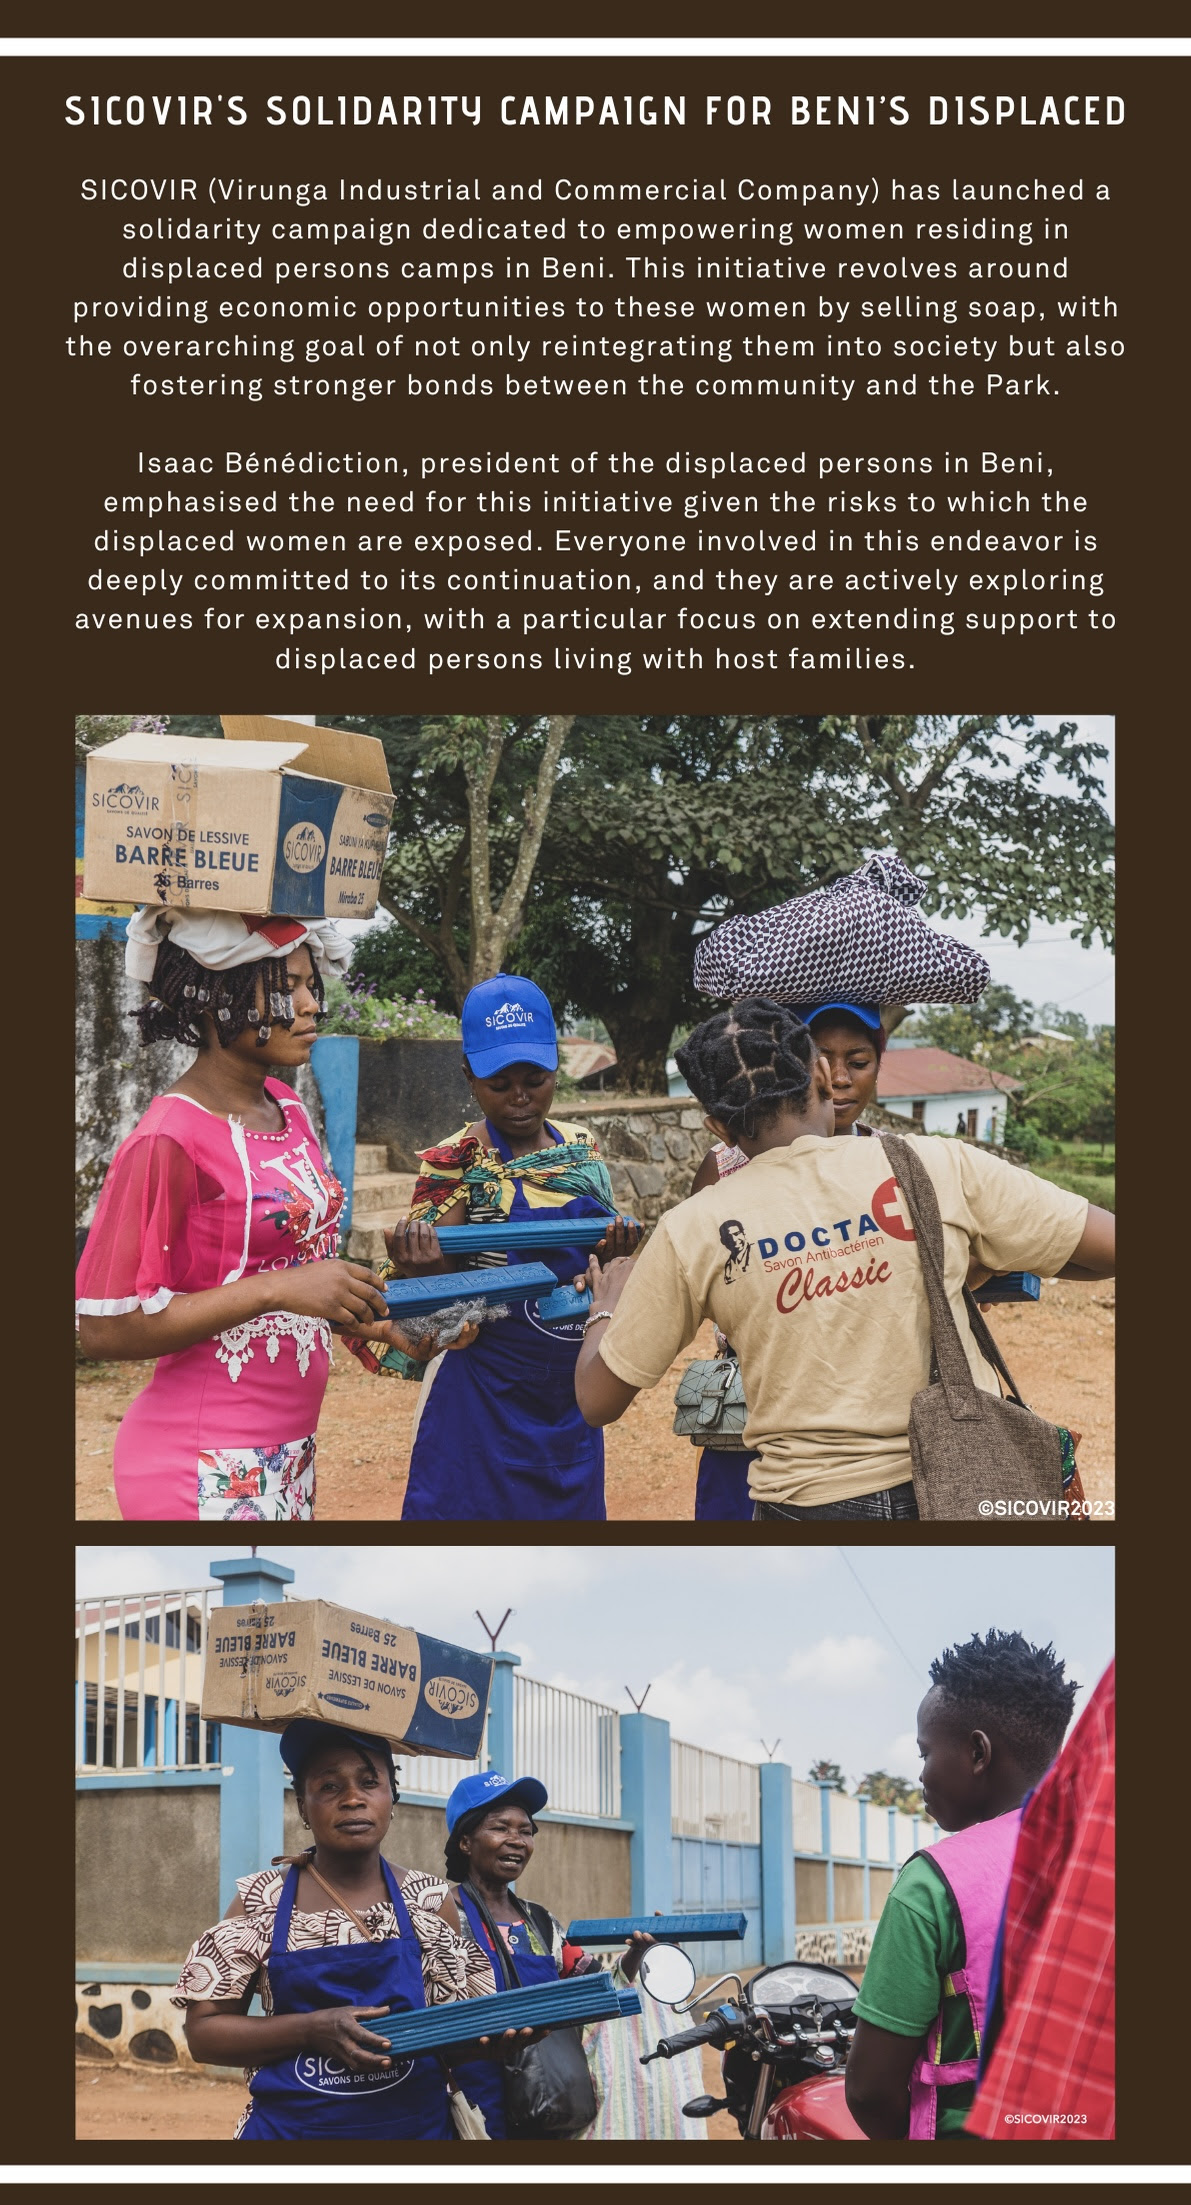 SICOVIR (Virunga Industrial and Commercial Company) has launched a solidarity campaign dedicated to empowering women residing in displaced persons camps in Beni.